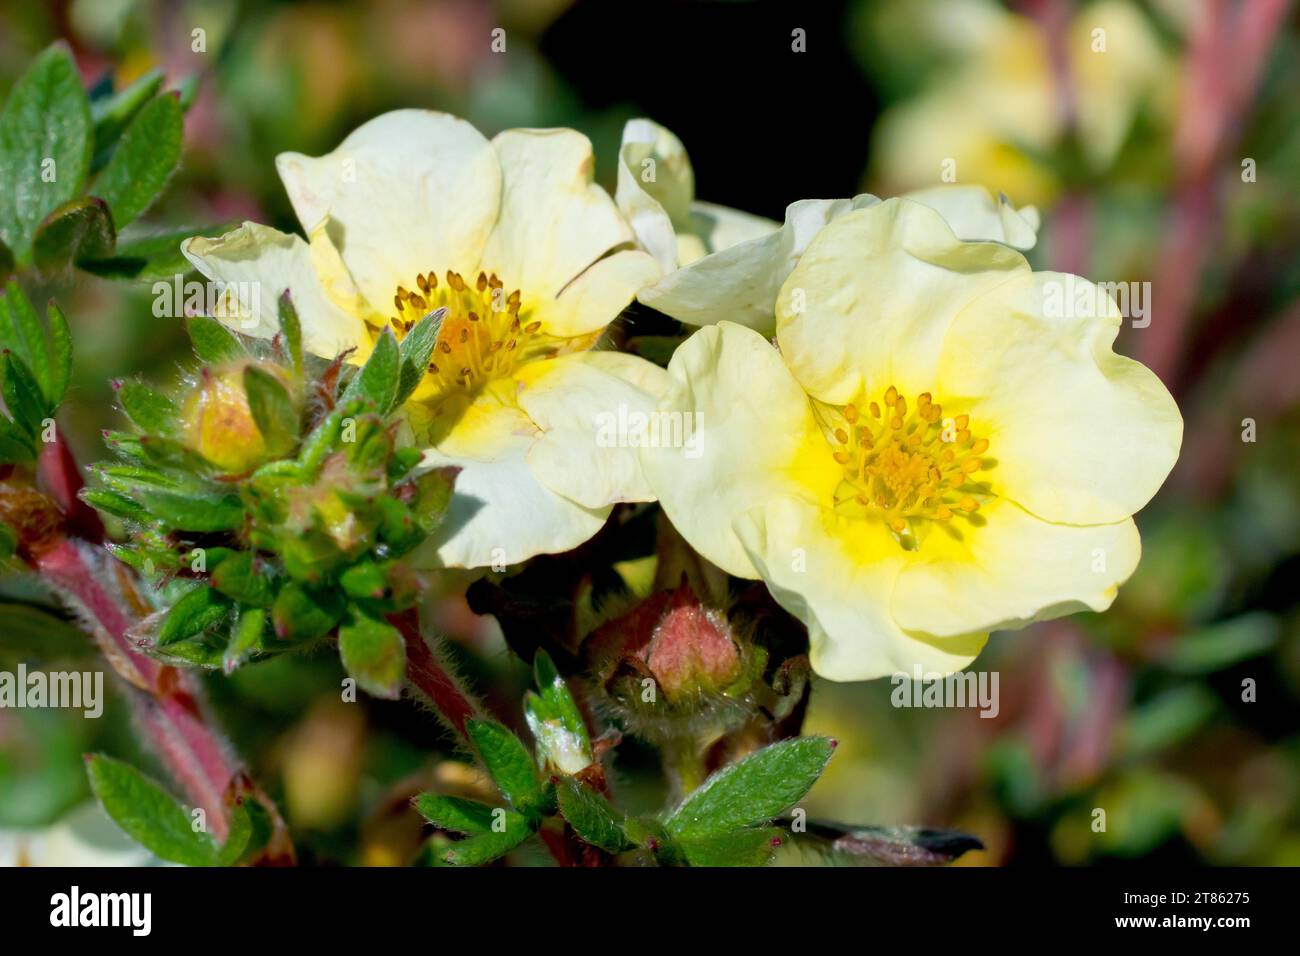 Shrubby Cinquefoil (potentilla fruticosa), close up showing the pale yellow flowers of this particular cultivar of the commonly plant shrub. Stock Photo